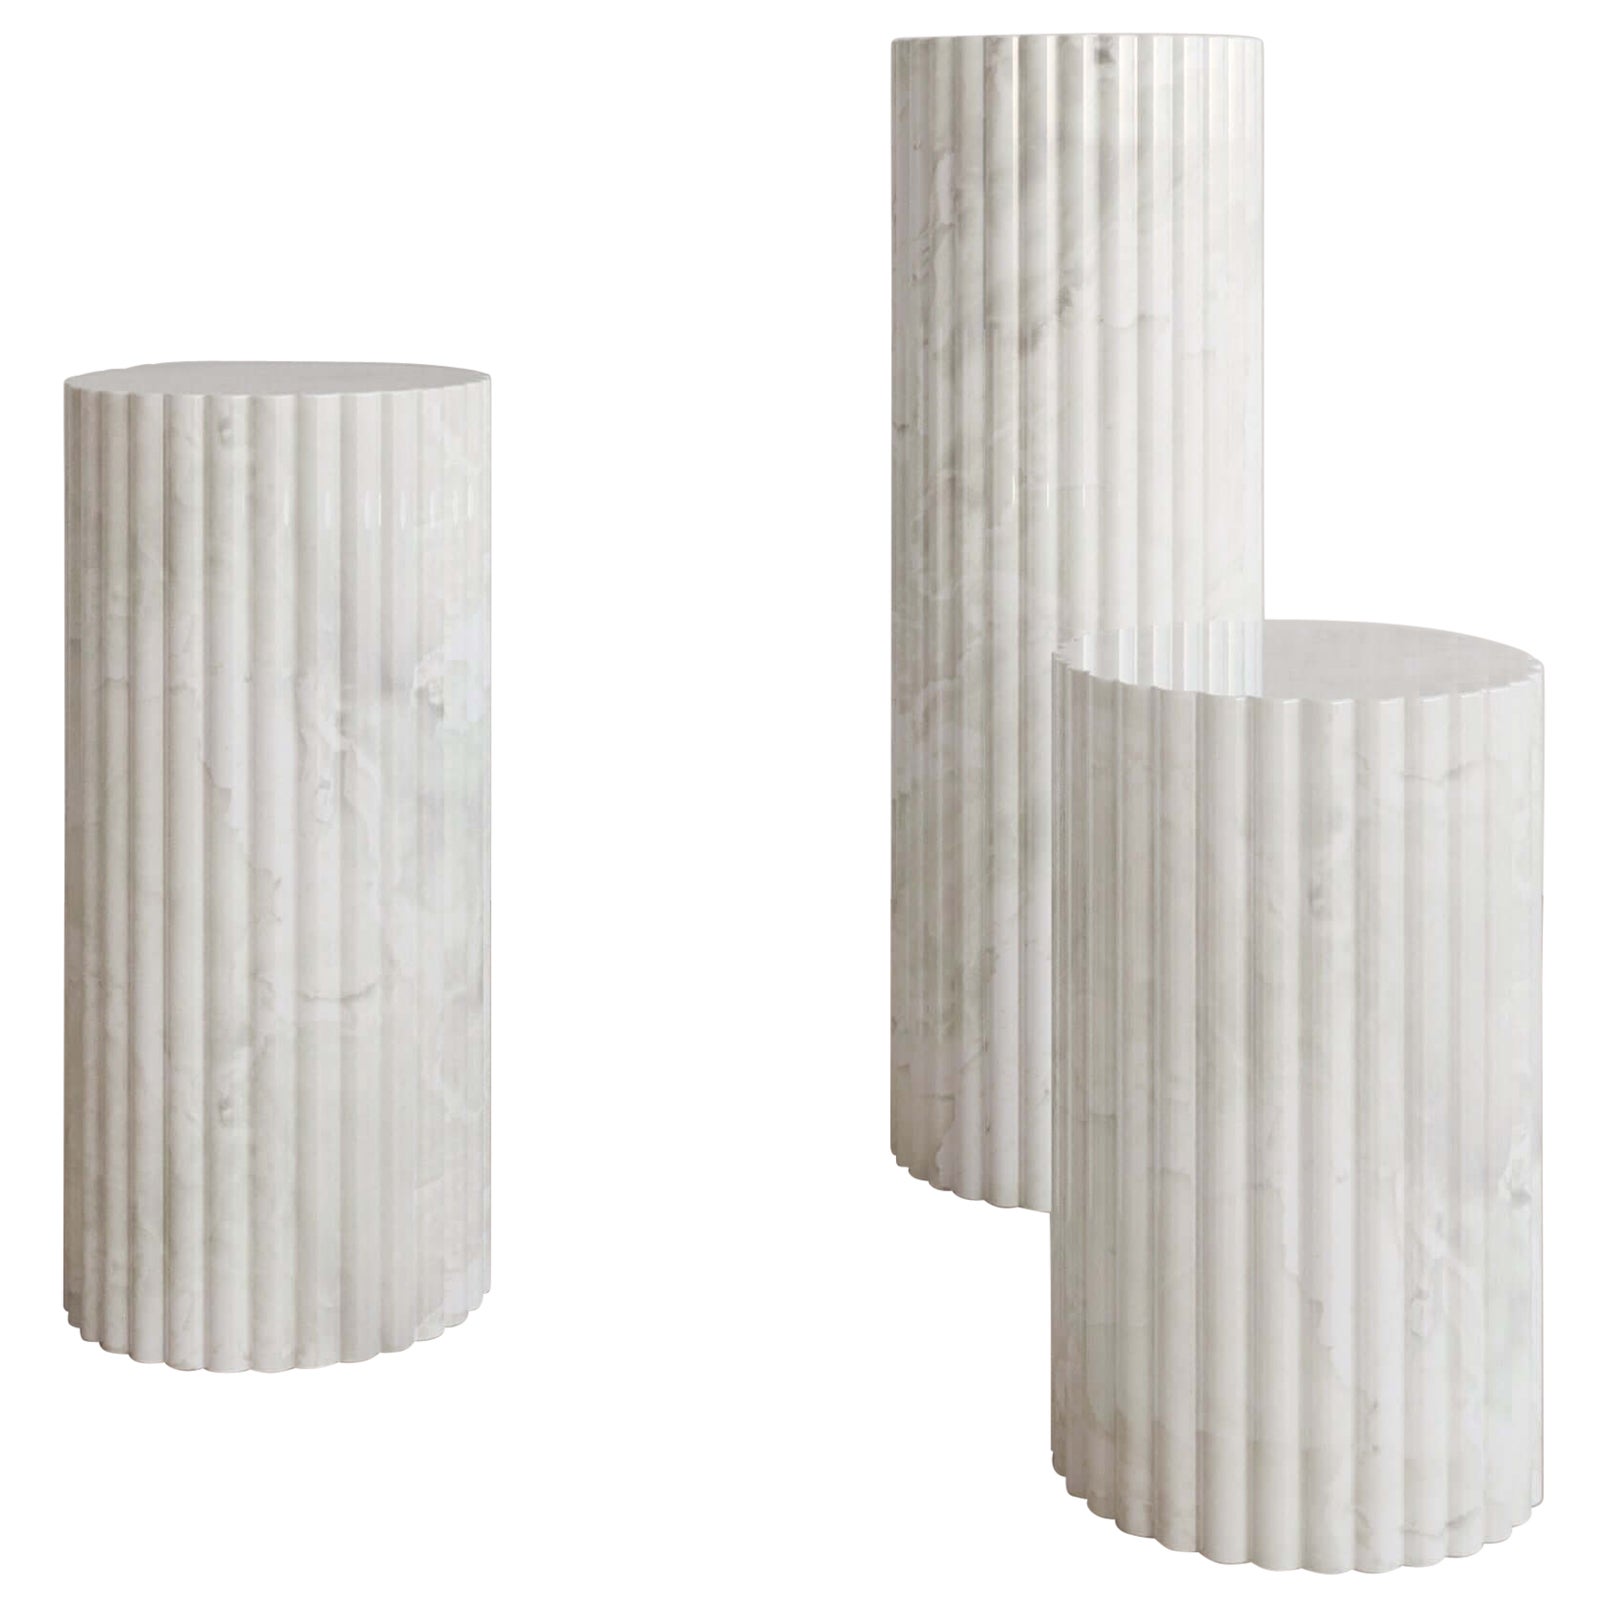 900mm Bianco Onyx Antica Pedestal by The Essentialist For Sale